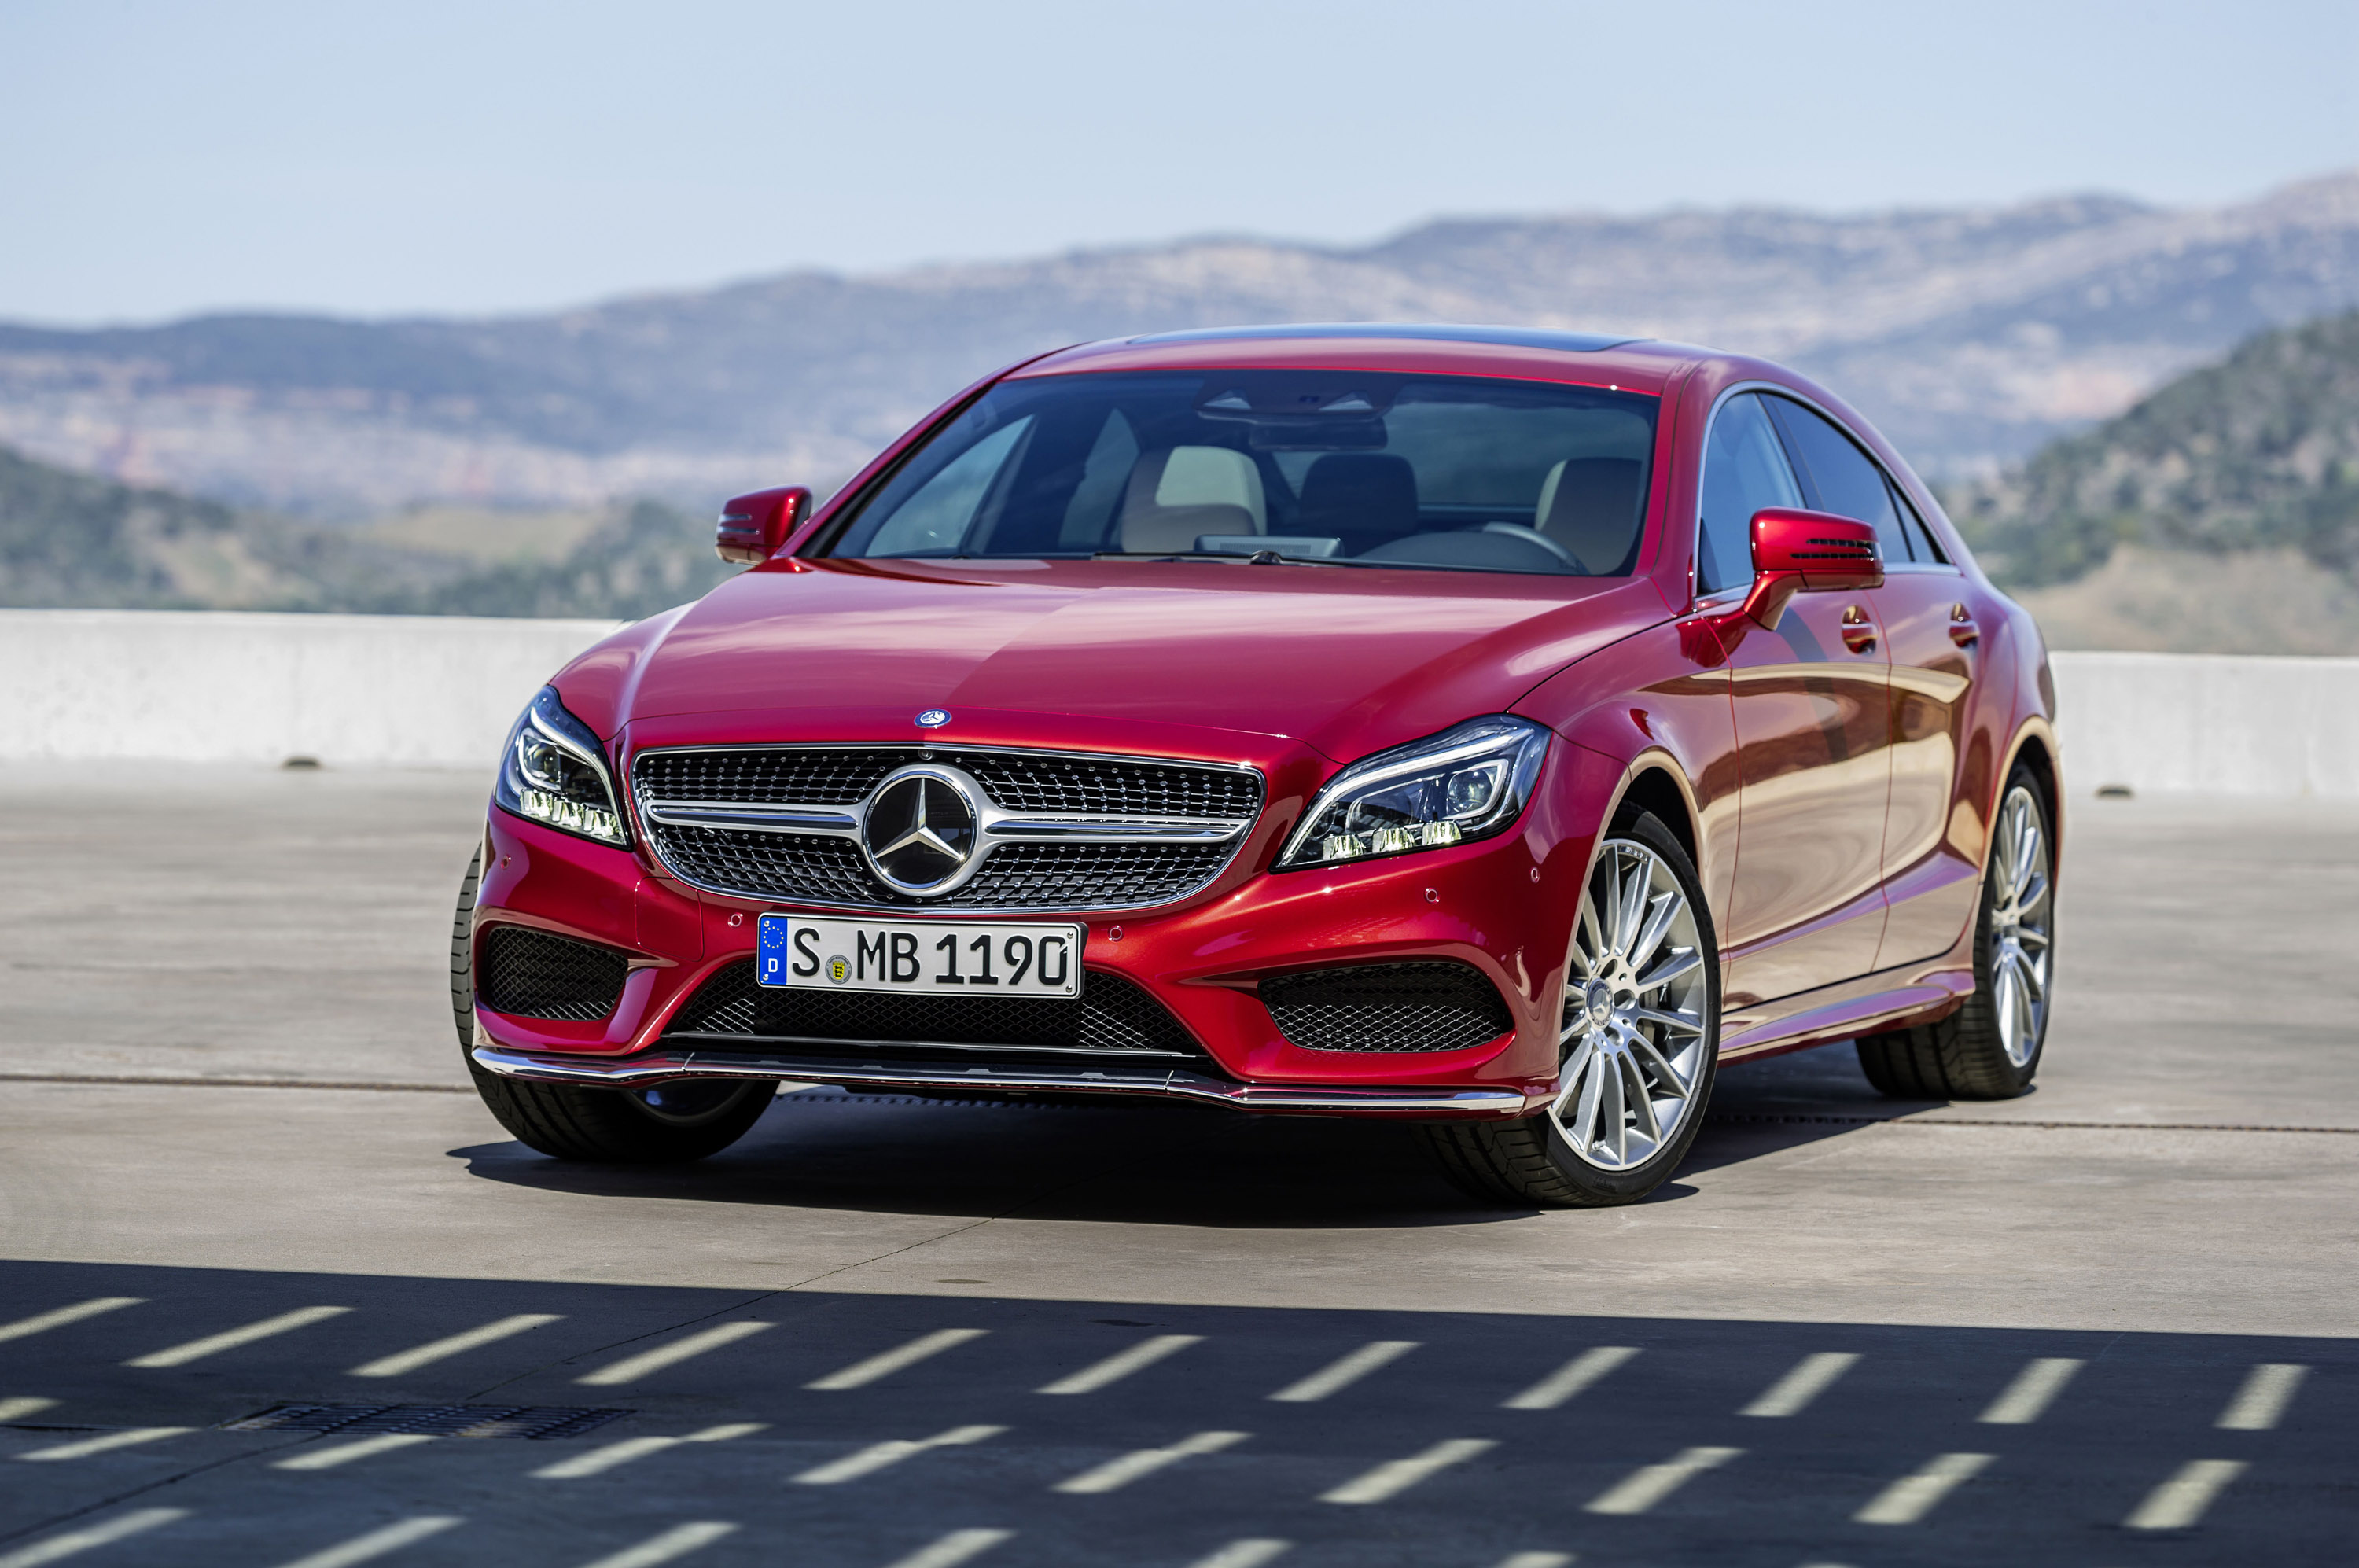 Mercedes-Benz CLS and CLS Shooting Brake